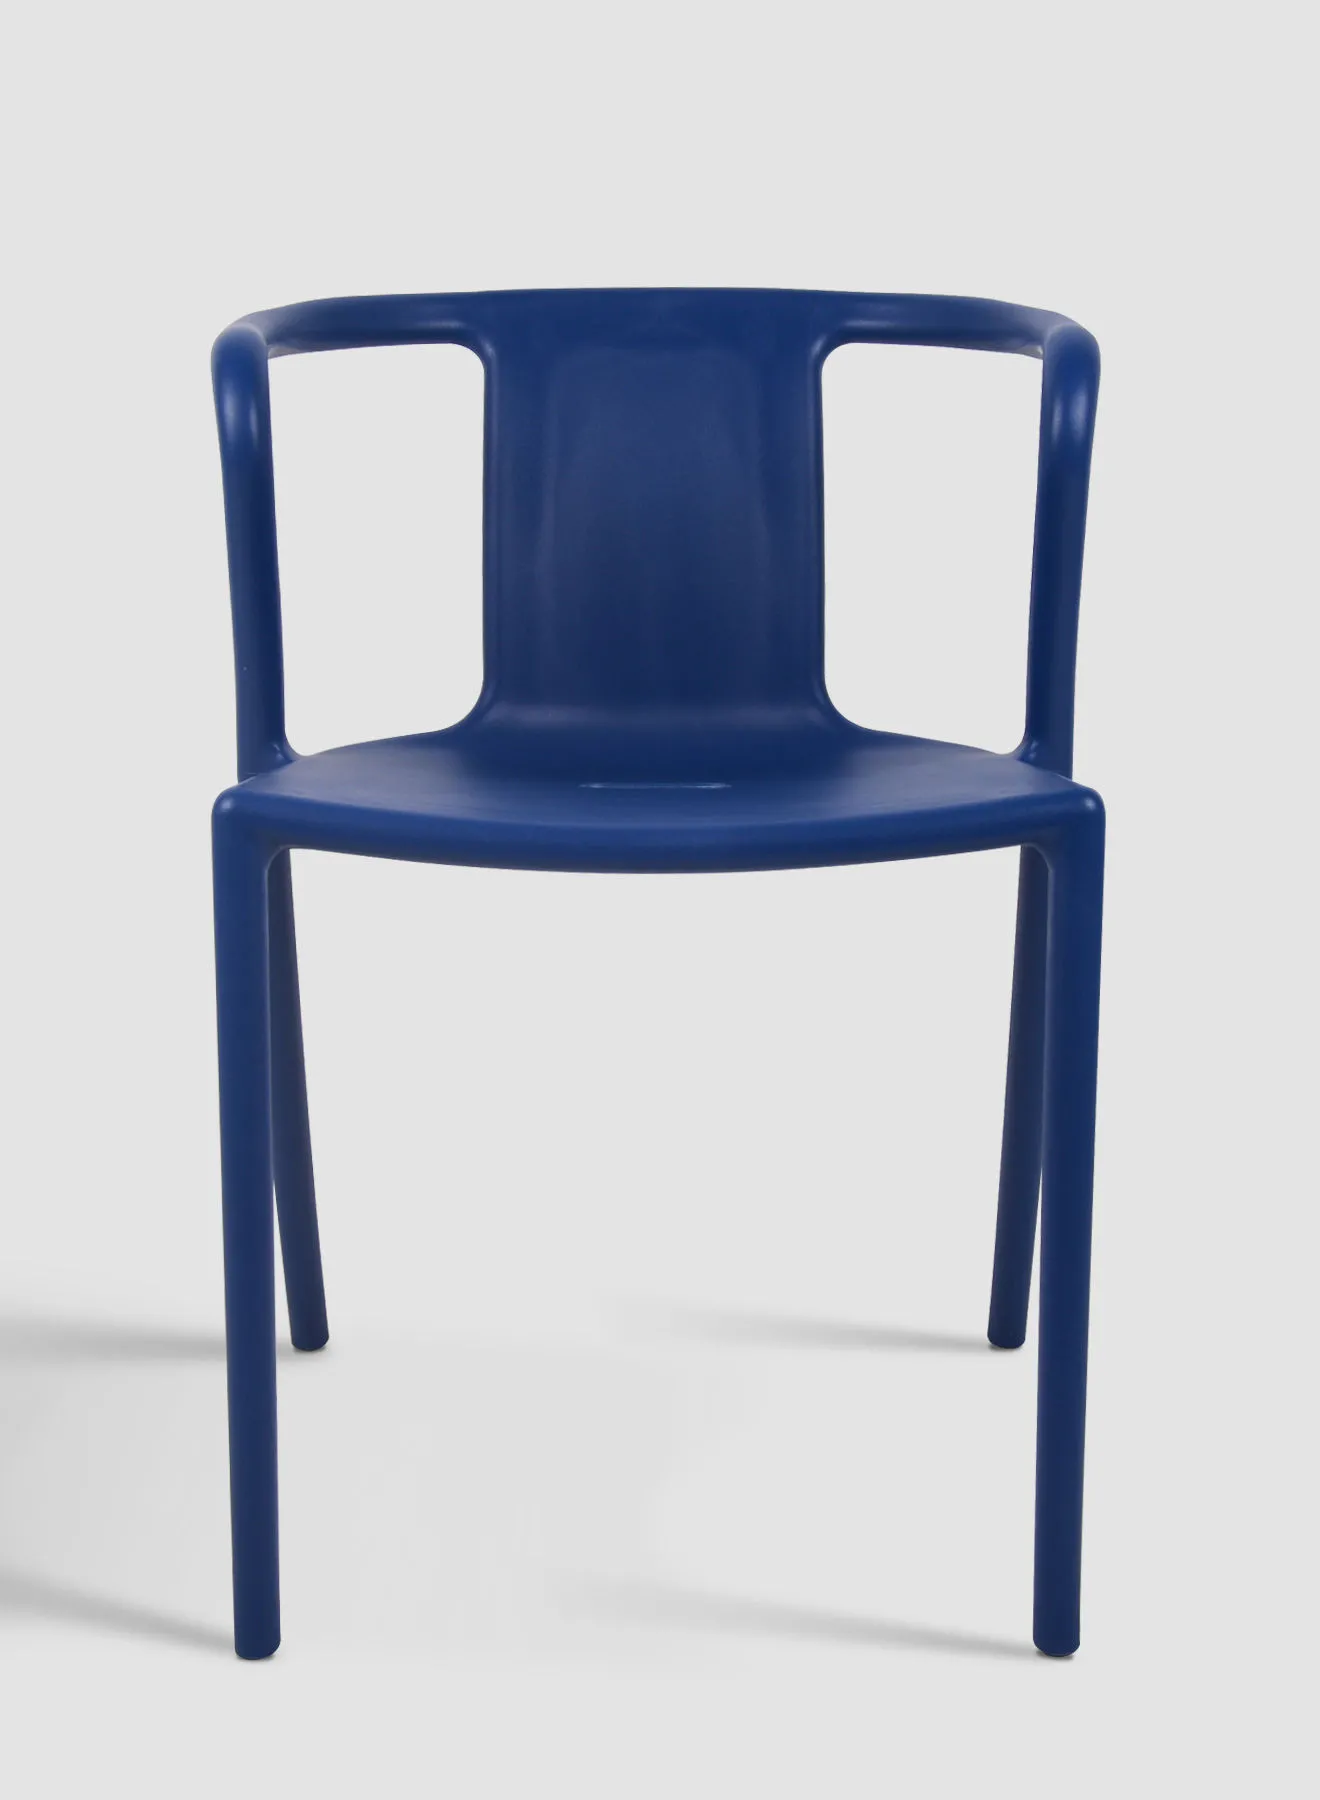 Switch Dining Chair In Navy Blue Plastic Chair Size 53 X 52 X 75 Cm